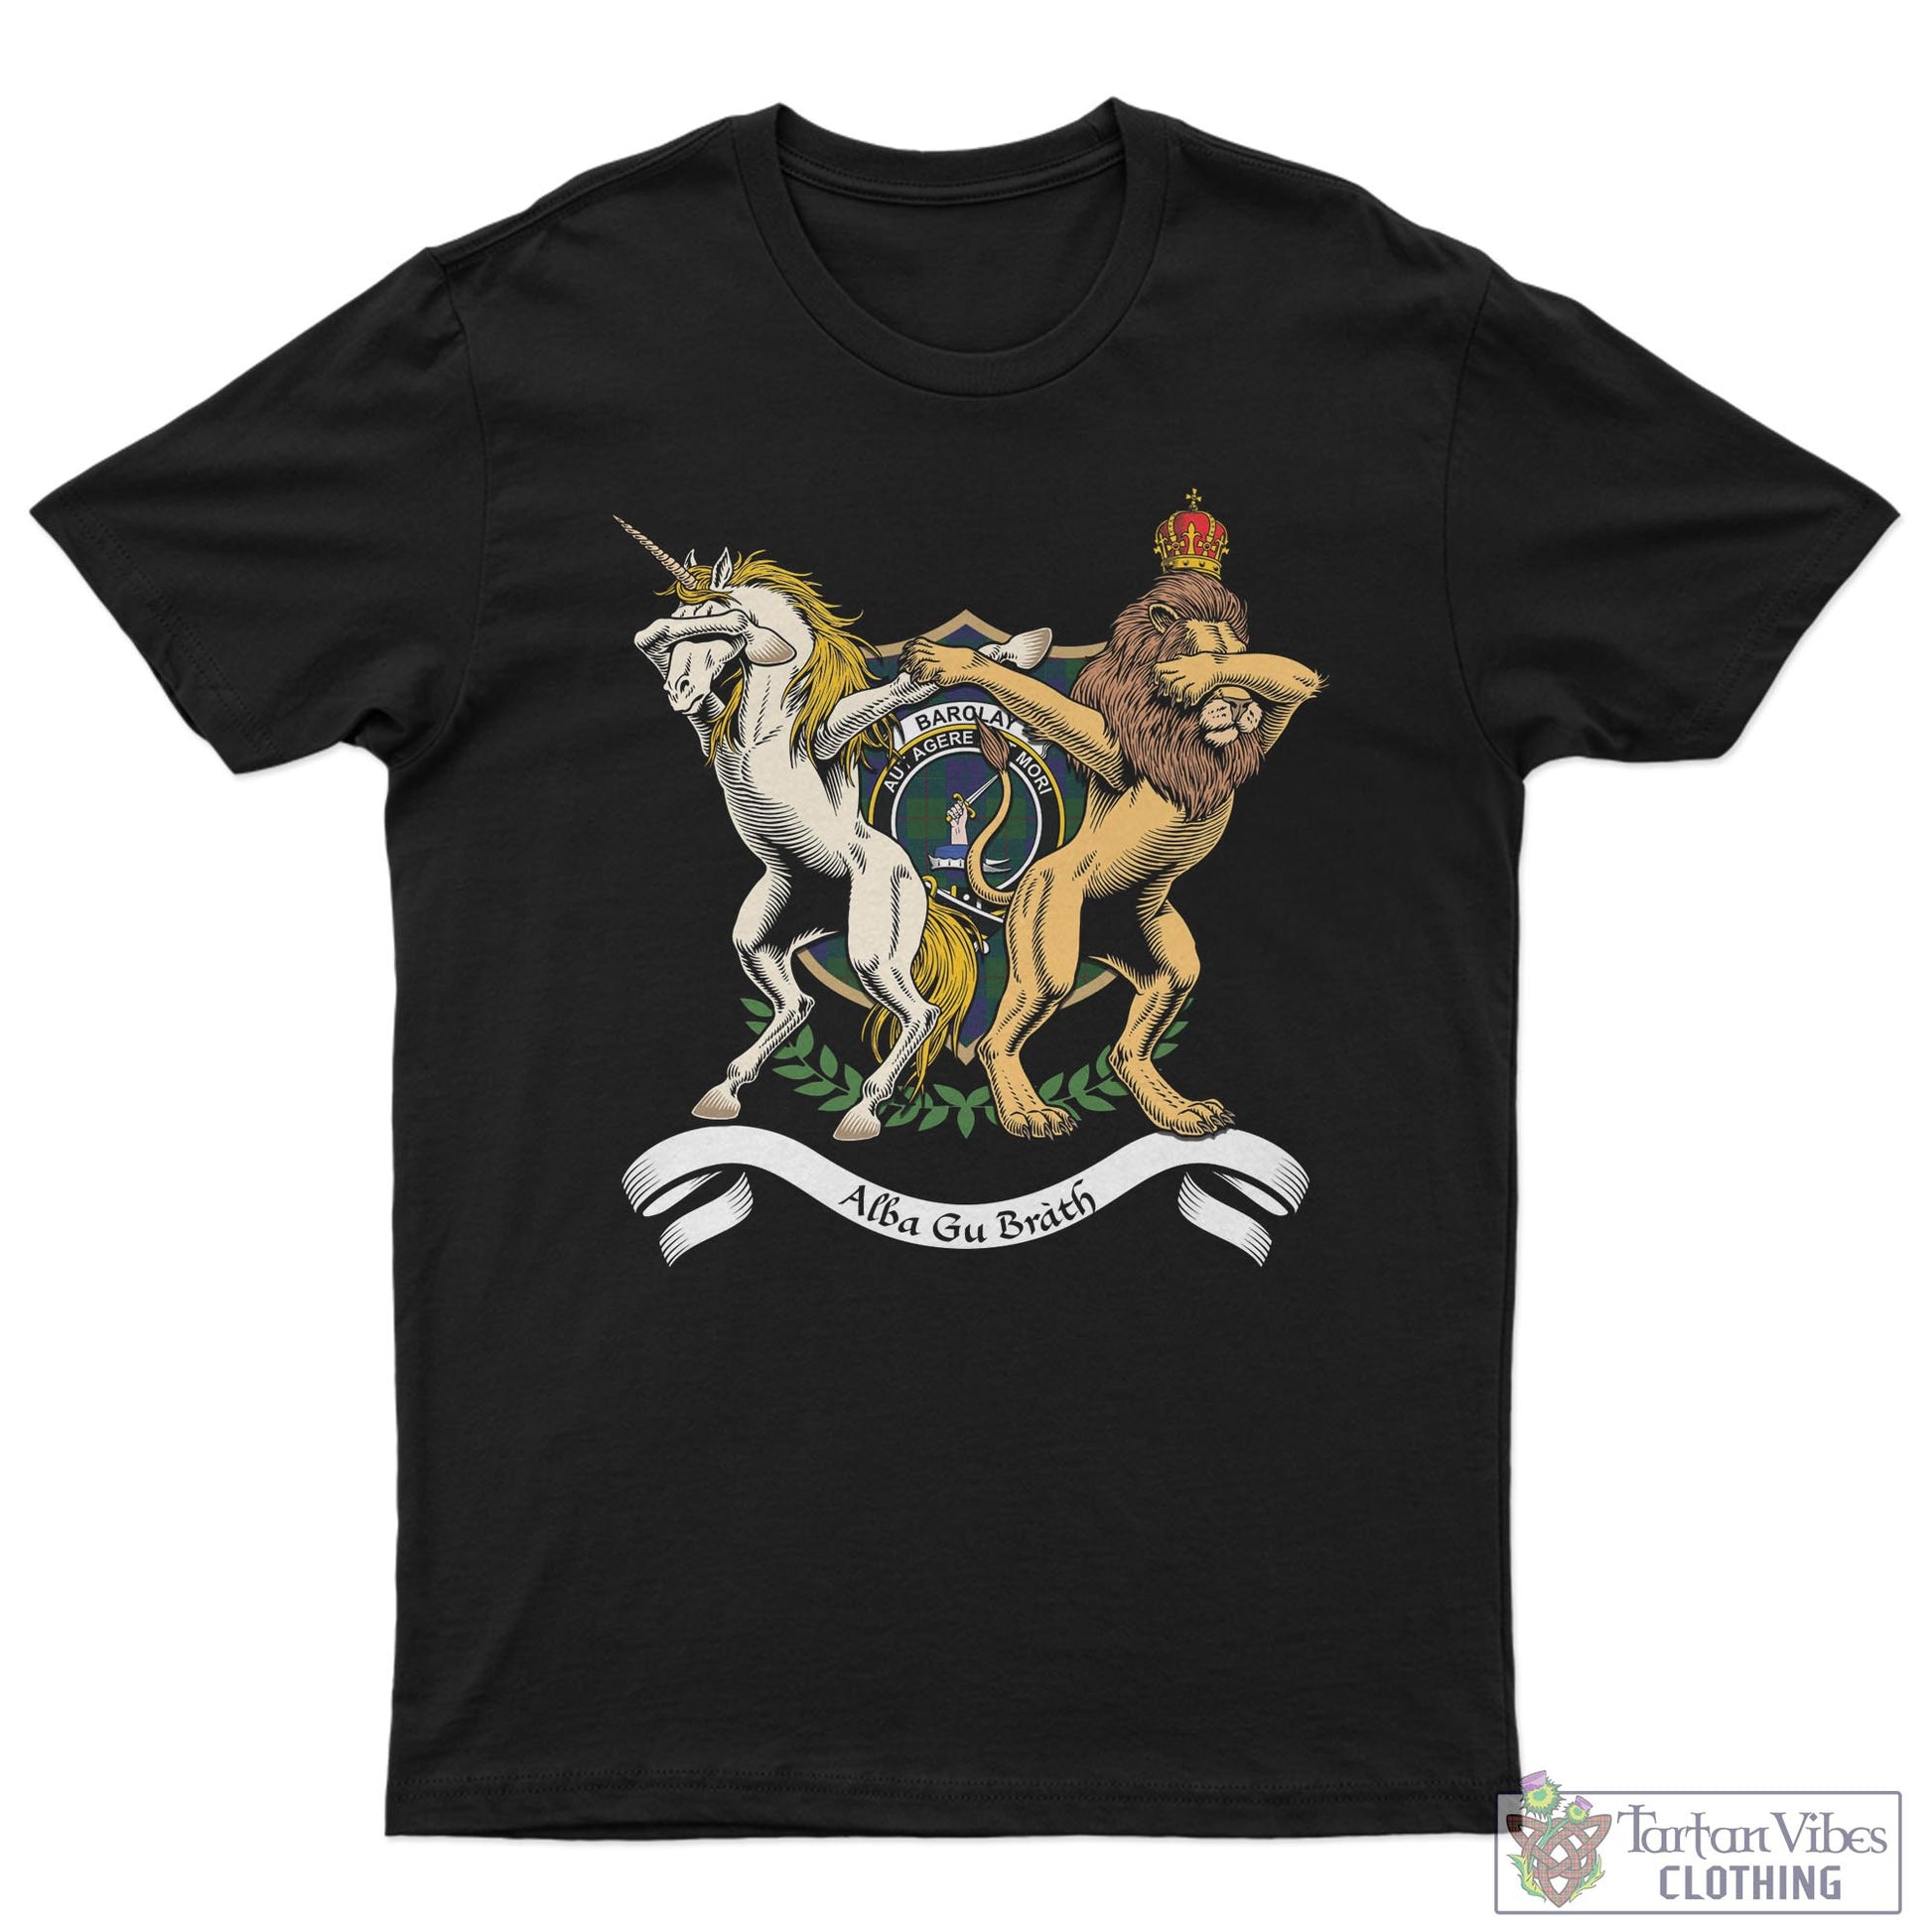 Tartan Vibes Clothing Barclay Family Crest Cotton Men's T-Shirt with Scotland Royal Coat Of Arm Funny Style